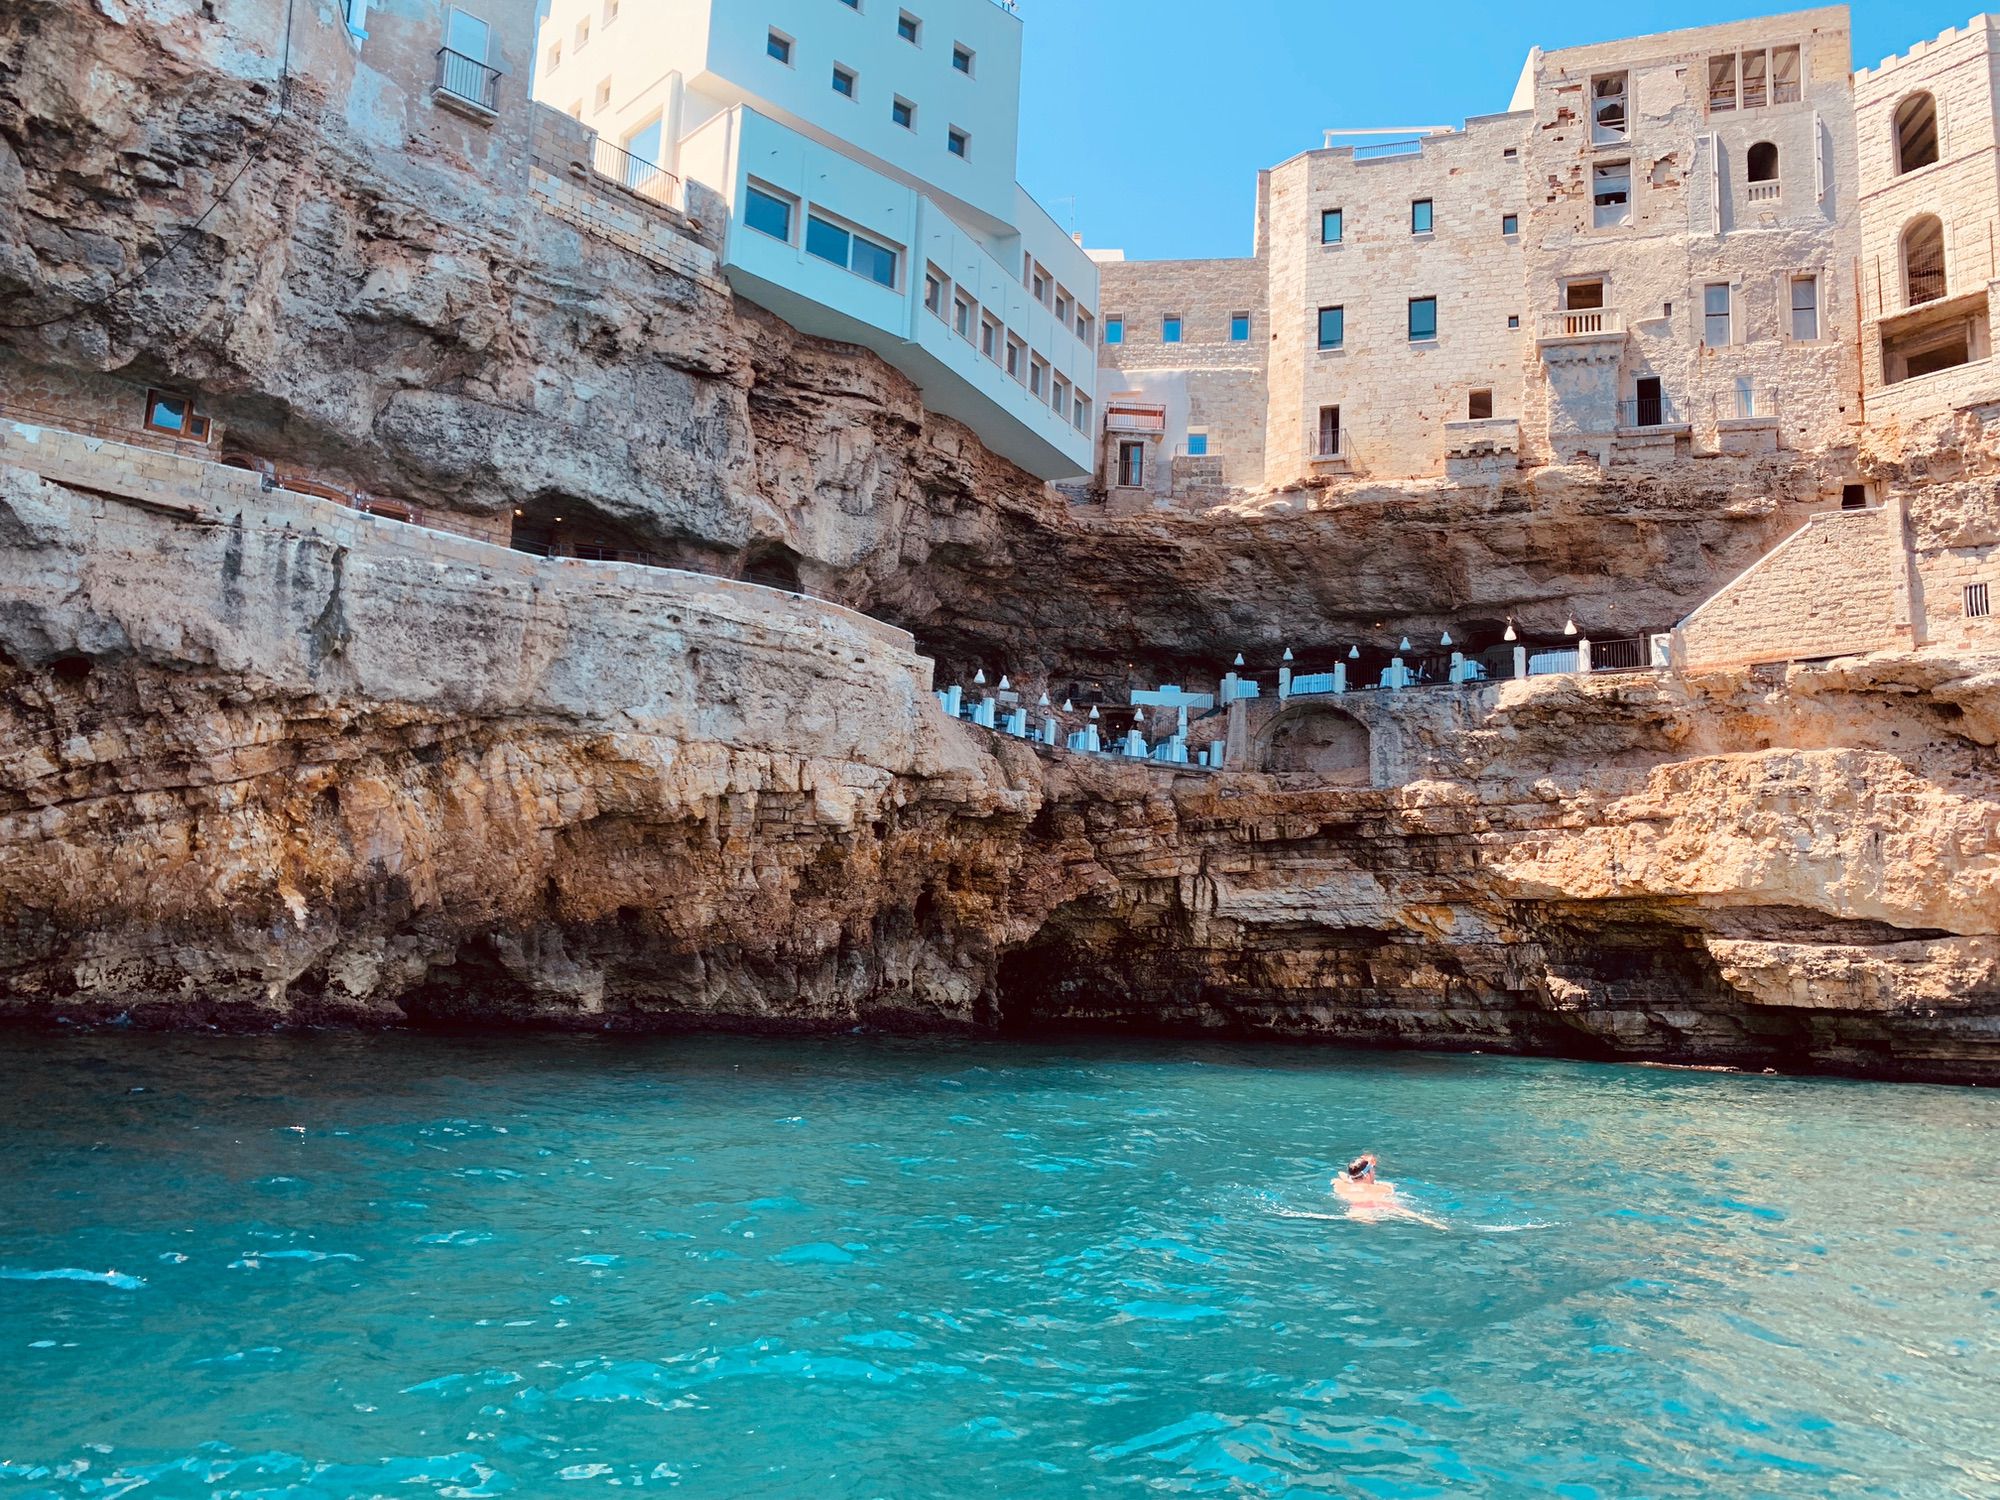 Boat excursion to caves of Polignano